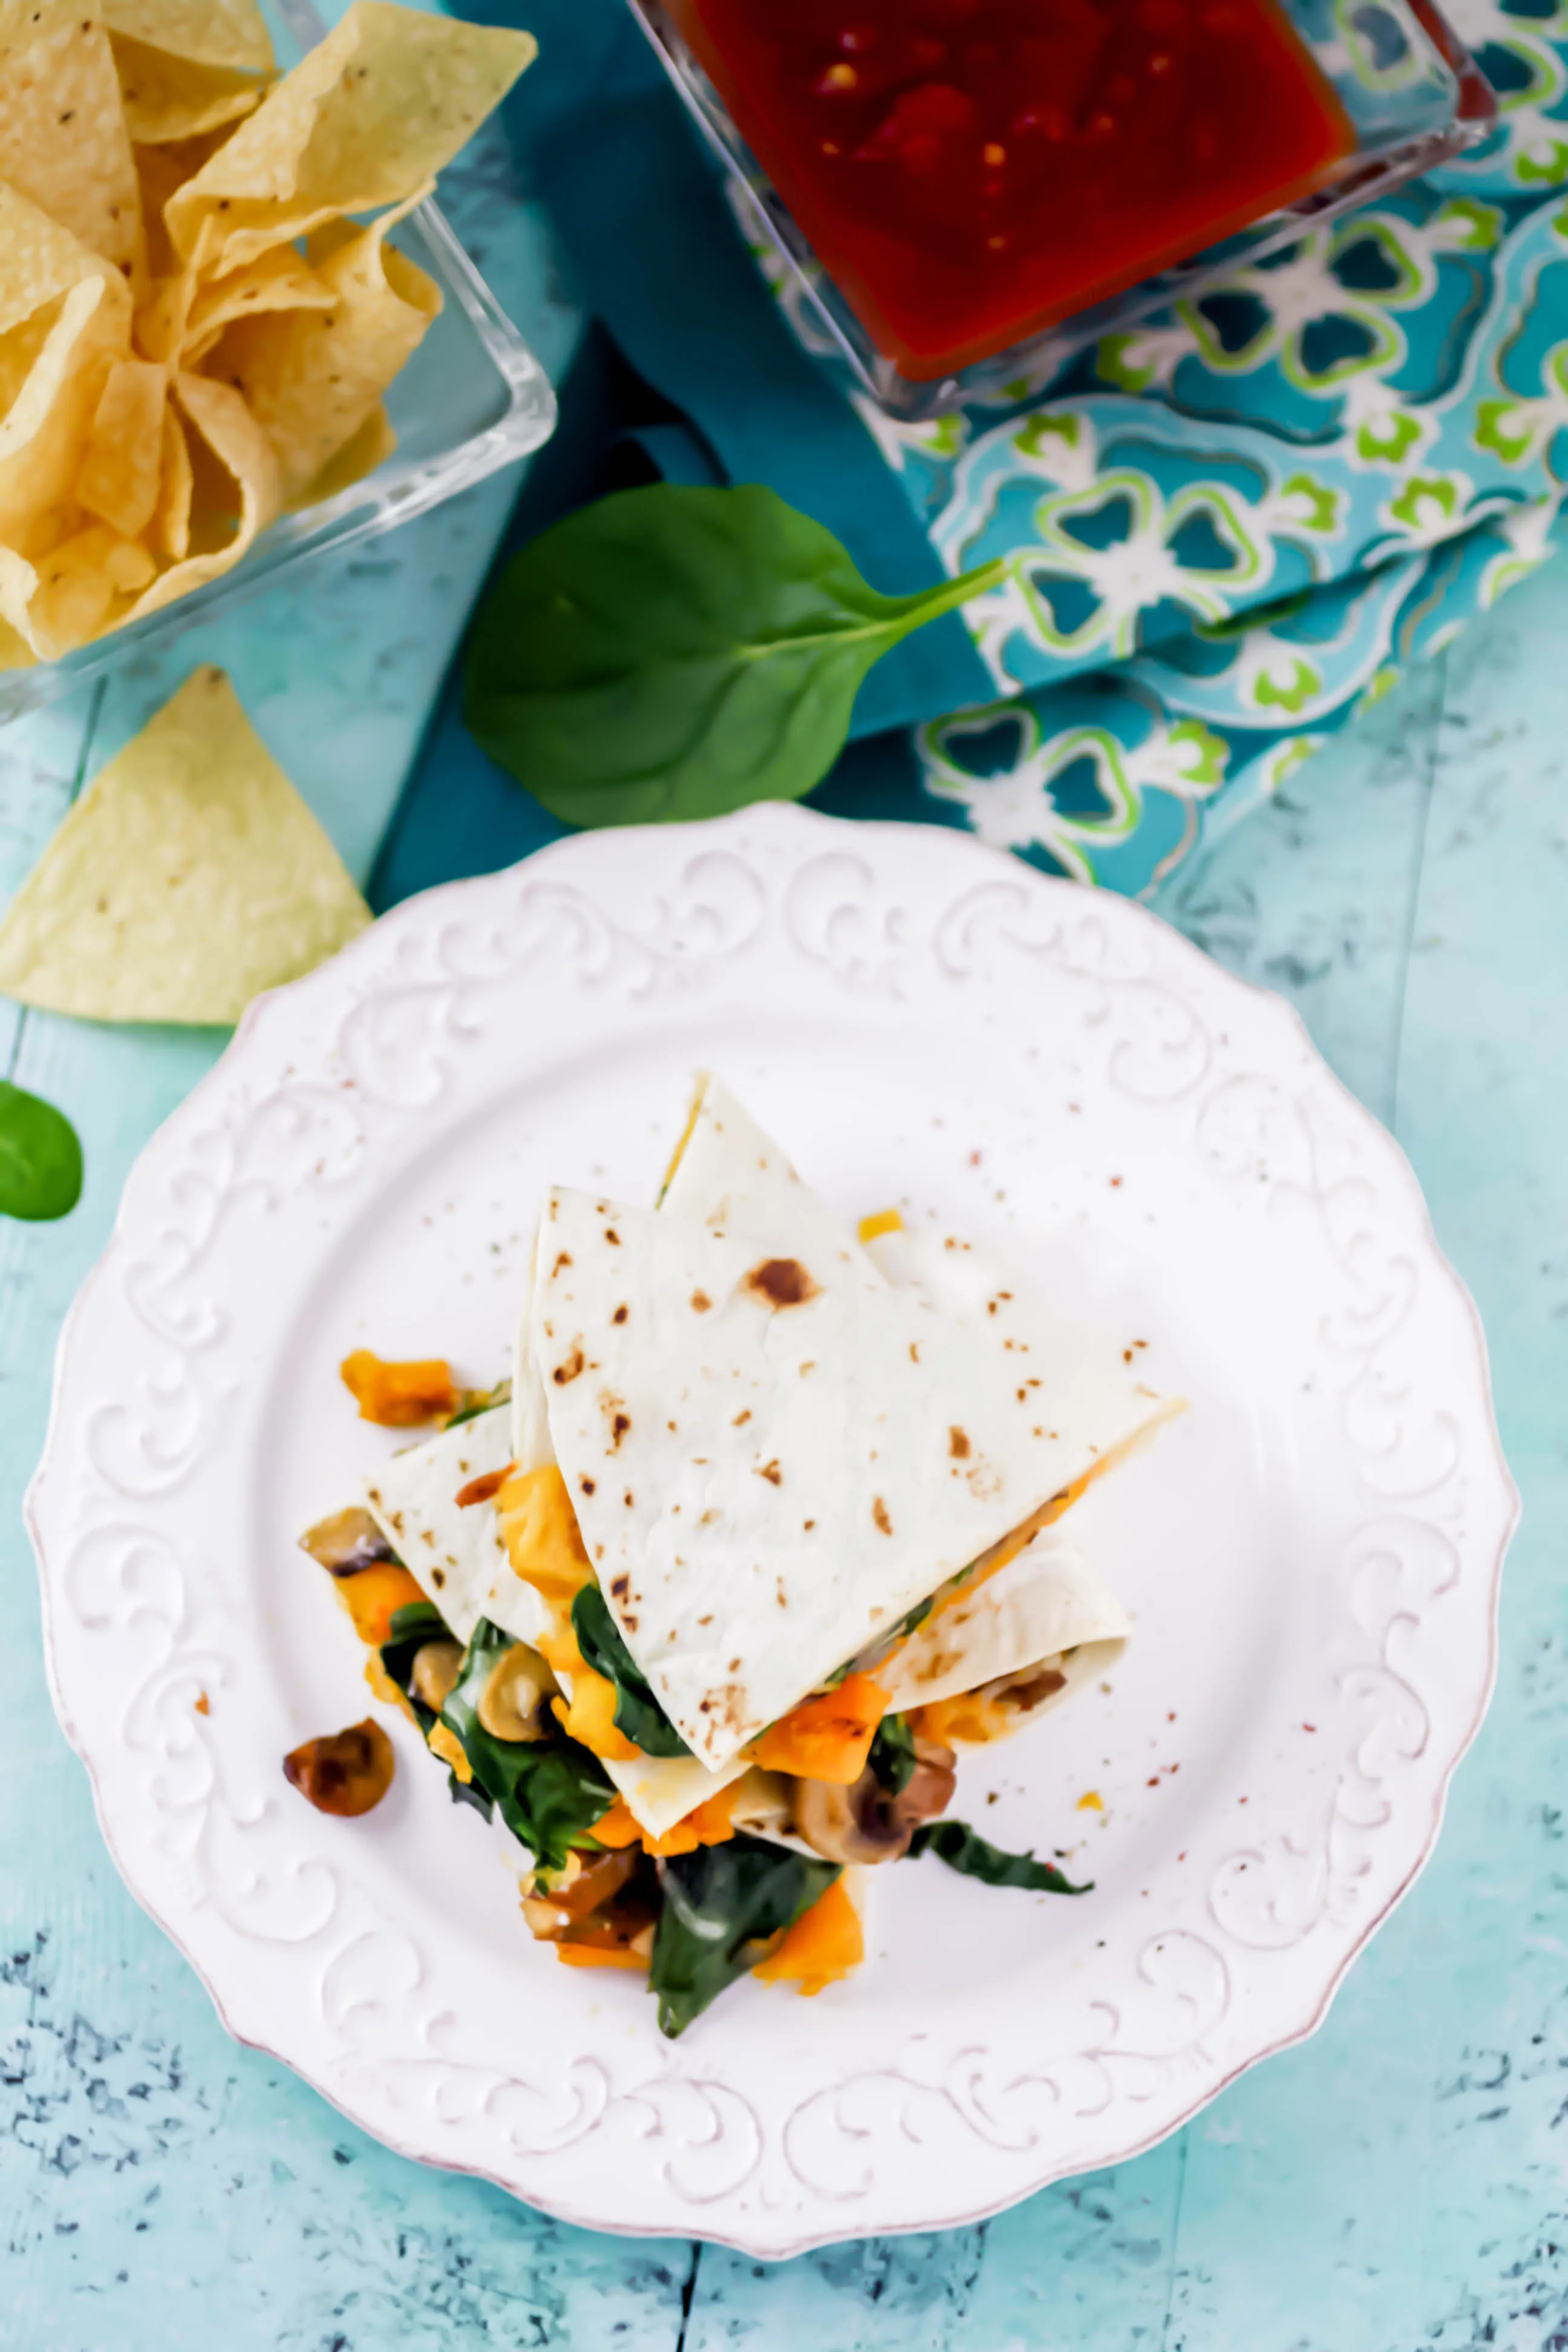 Butternut Squash, Mushroom, Onion, and Spinach Quesadillas are a great easy-meal option. Butternut Squash, Mushroom, Onion, and Spinach Quesadillas include colorful and seasonal ingredients for a fabulous meal.